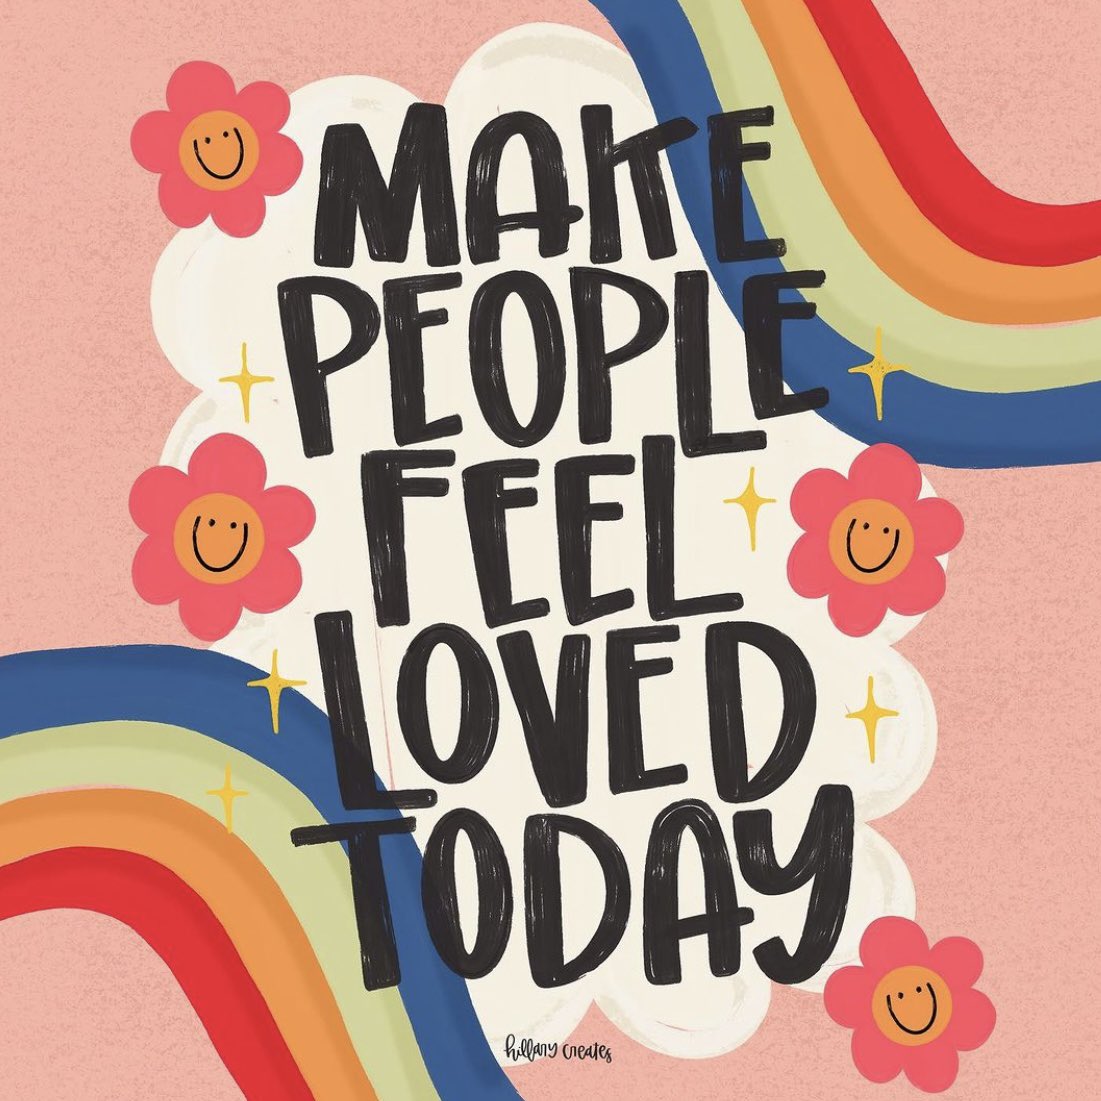 Do what you can to make people feel loved today (and every day) Image: instagram.com/hillary.creates